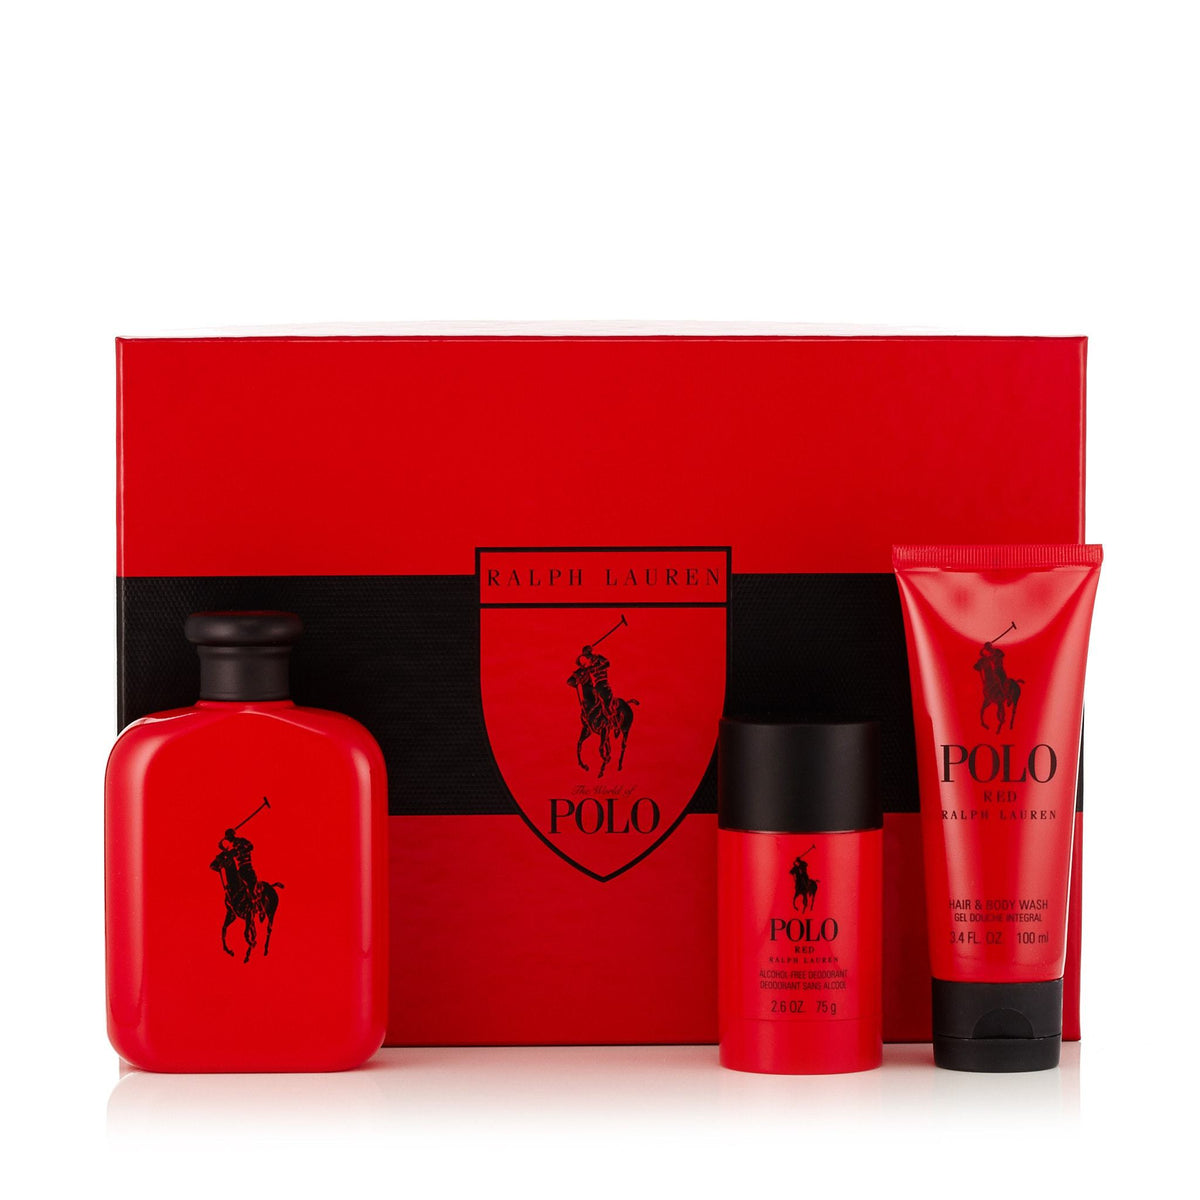 Polo Red Gift Set EDT, Body Wash and Deodorant for Men by Ralph Lauren 4.2 oz.